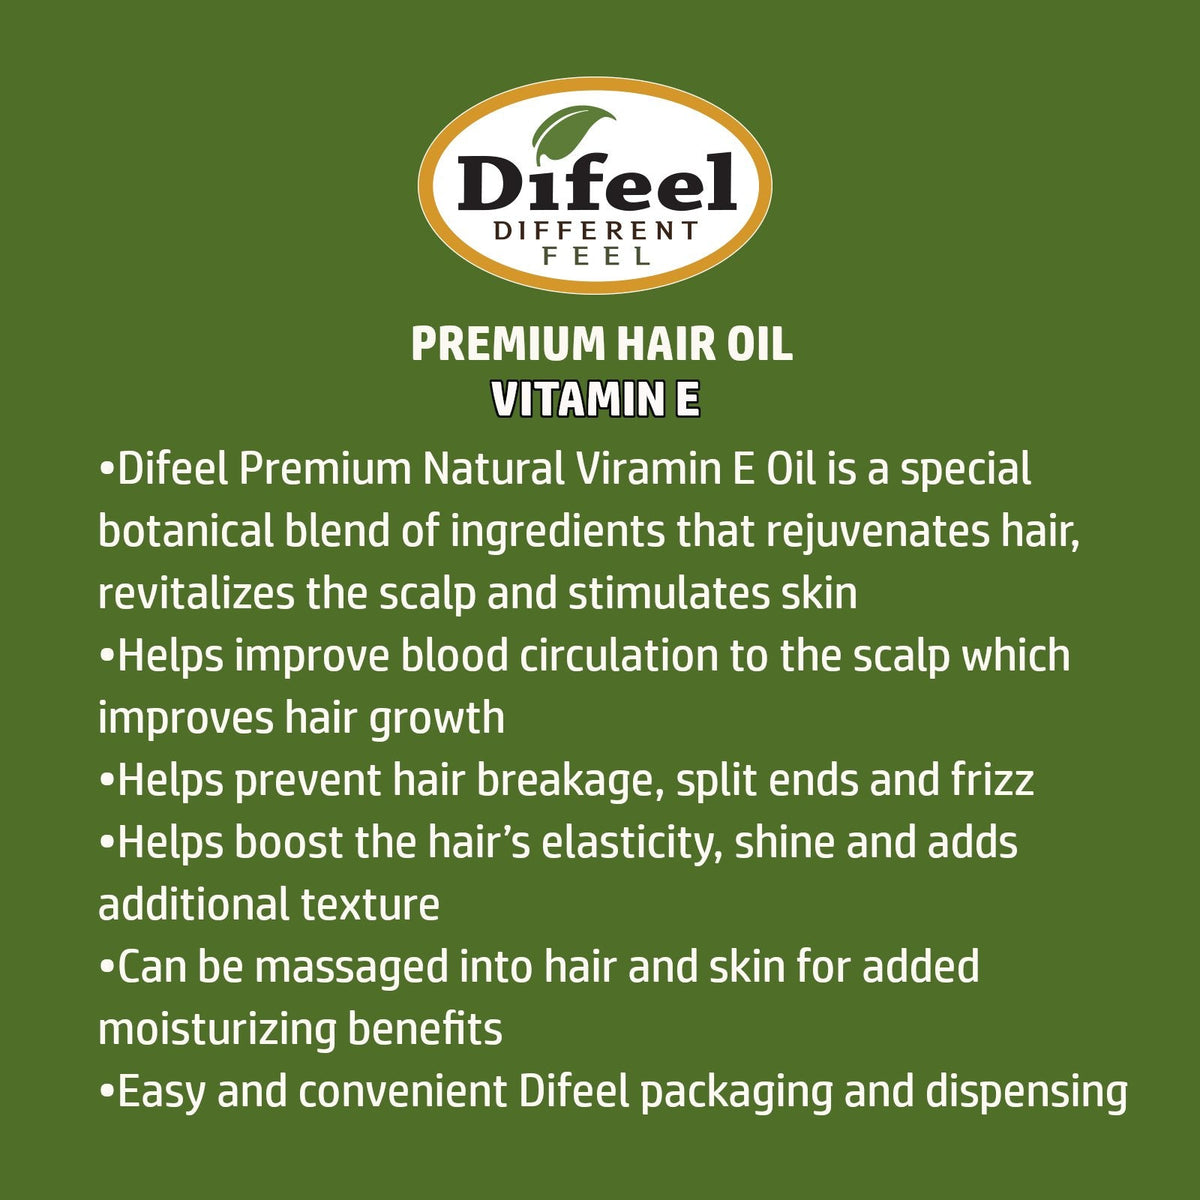 Difeel Premium Natural Hair Oil - Vitamin E Oil 7.1 oz. (PACK OF 2) by difeel - find your natural beauty